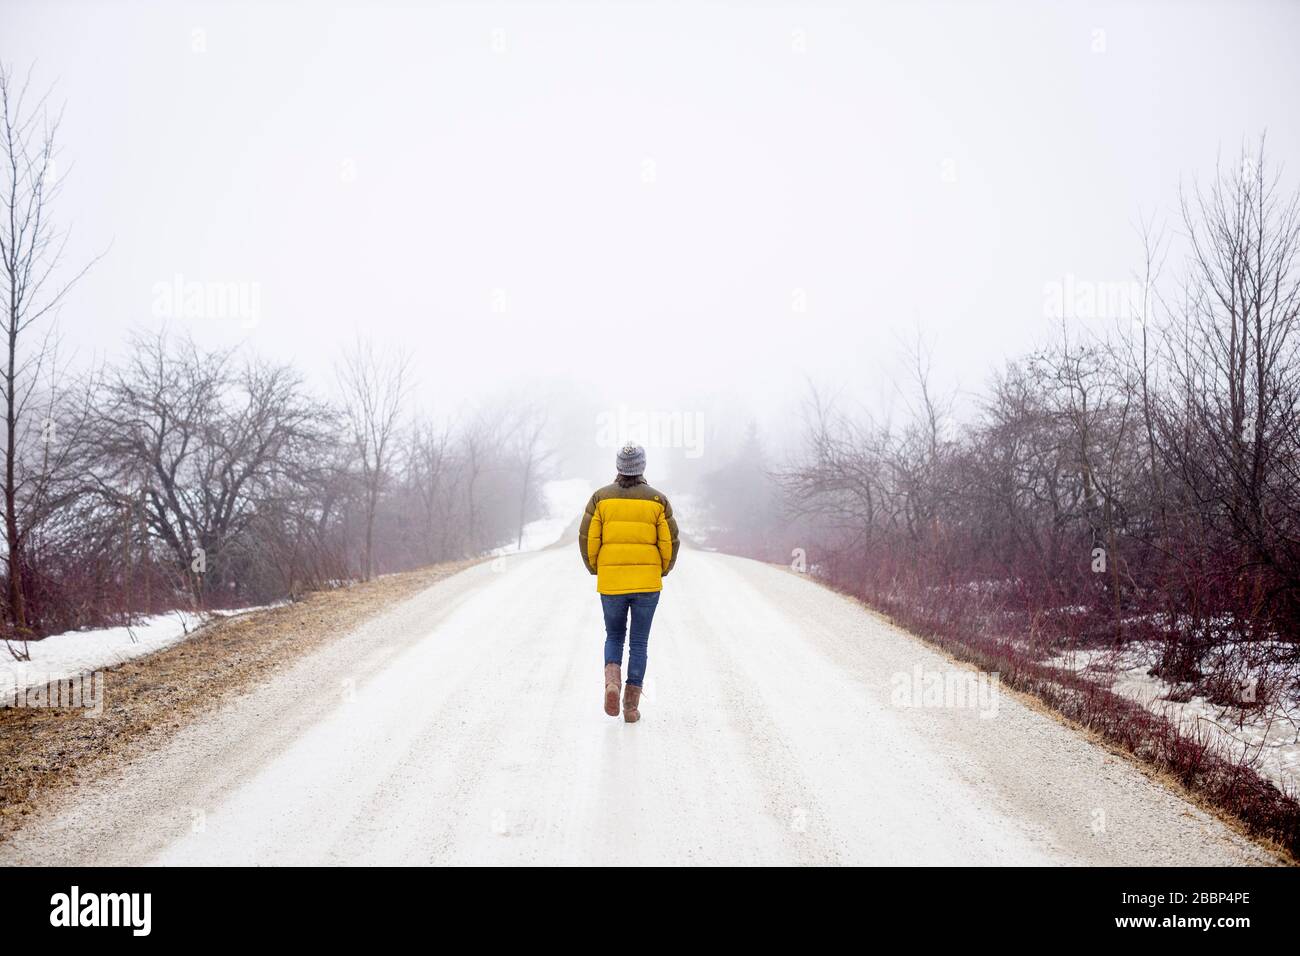 A lady walks alone on a gravel road during the emergency regulations regarding the coronavirus / COVID-19, on a foggy cold spring day. --- Stock Photo